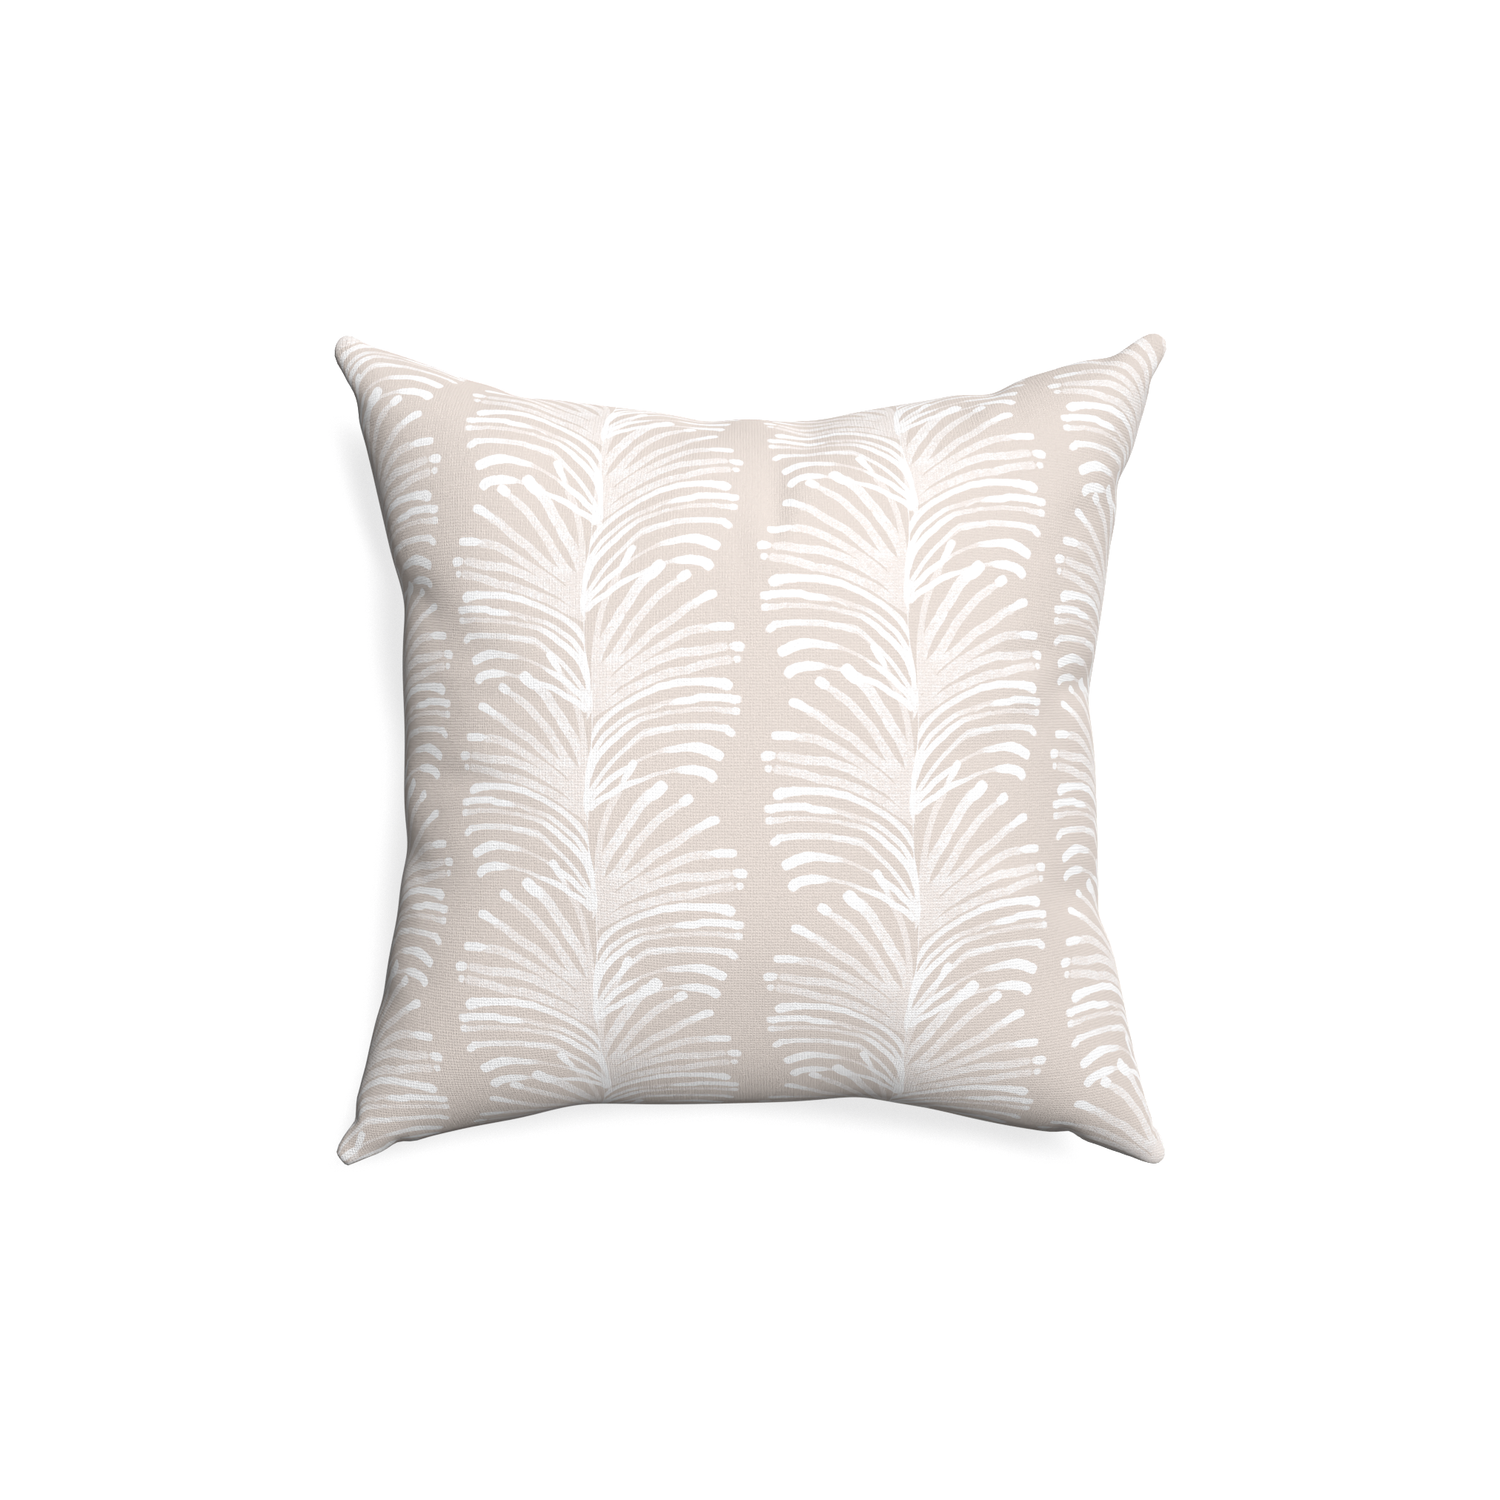 18-square emma sand custom sand colored botanical stripepillow with none on white background